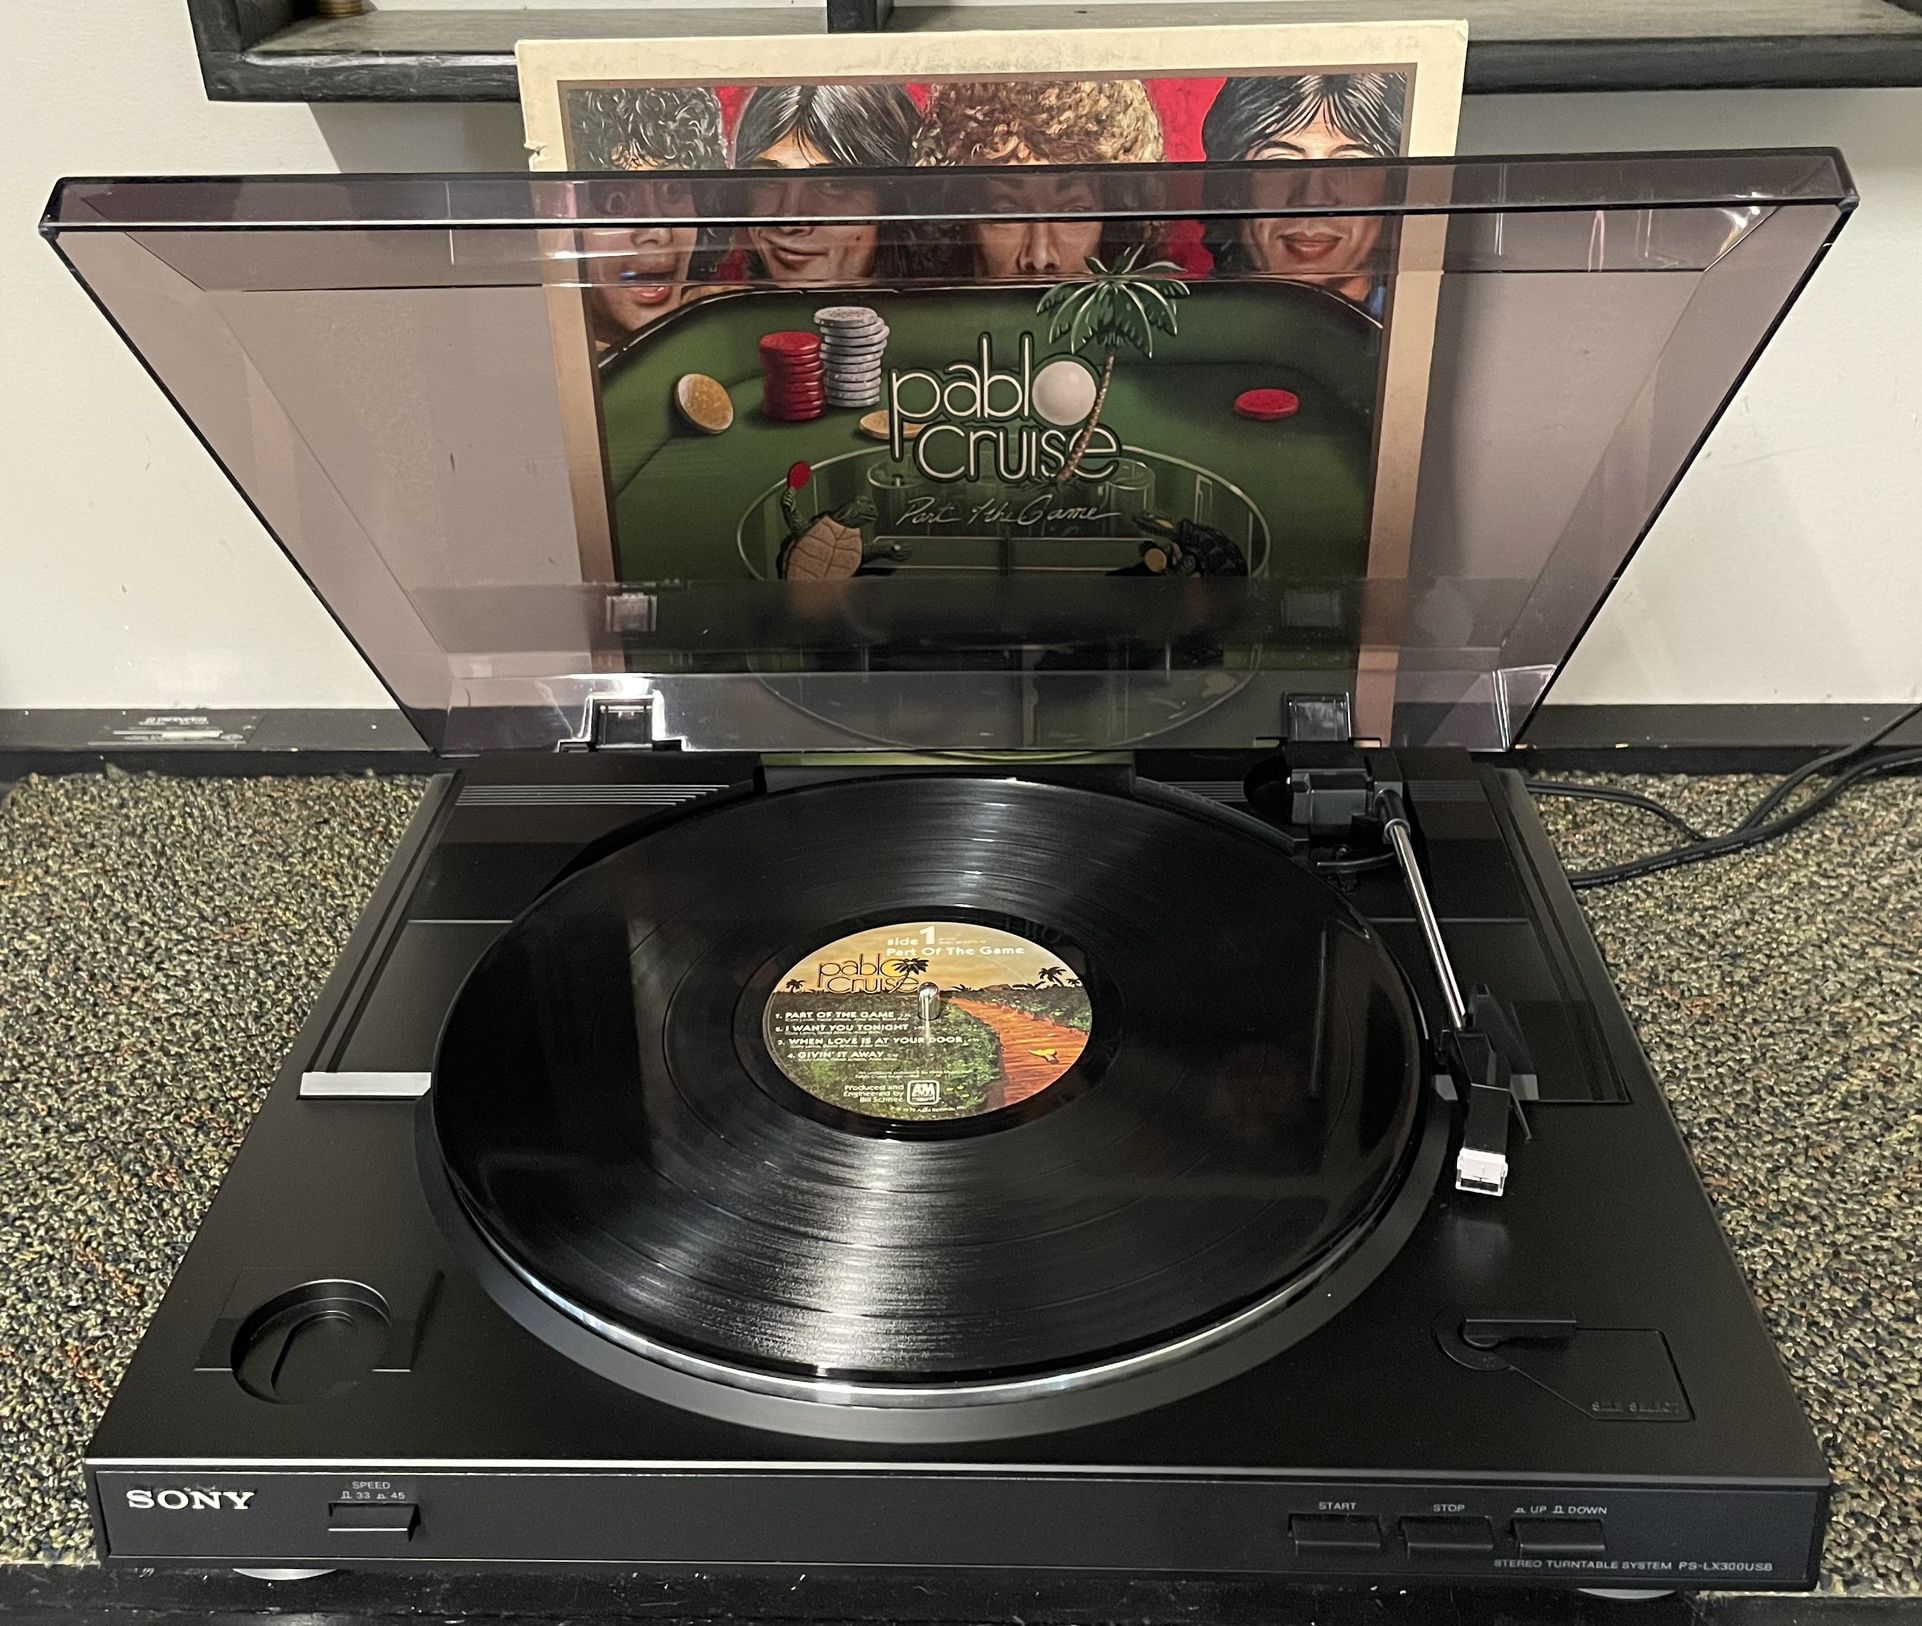 Sony PS-LX300 Turntable #1 for Sale in Conway, SC - OfferUp